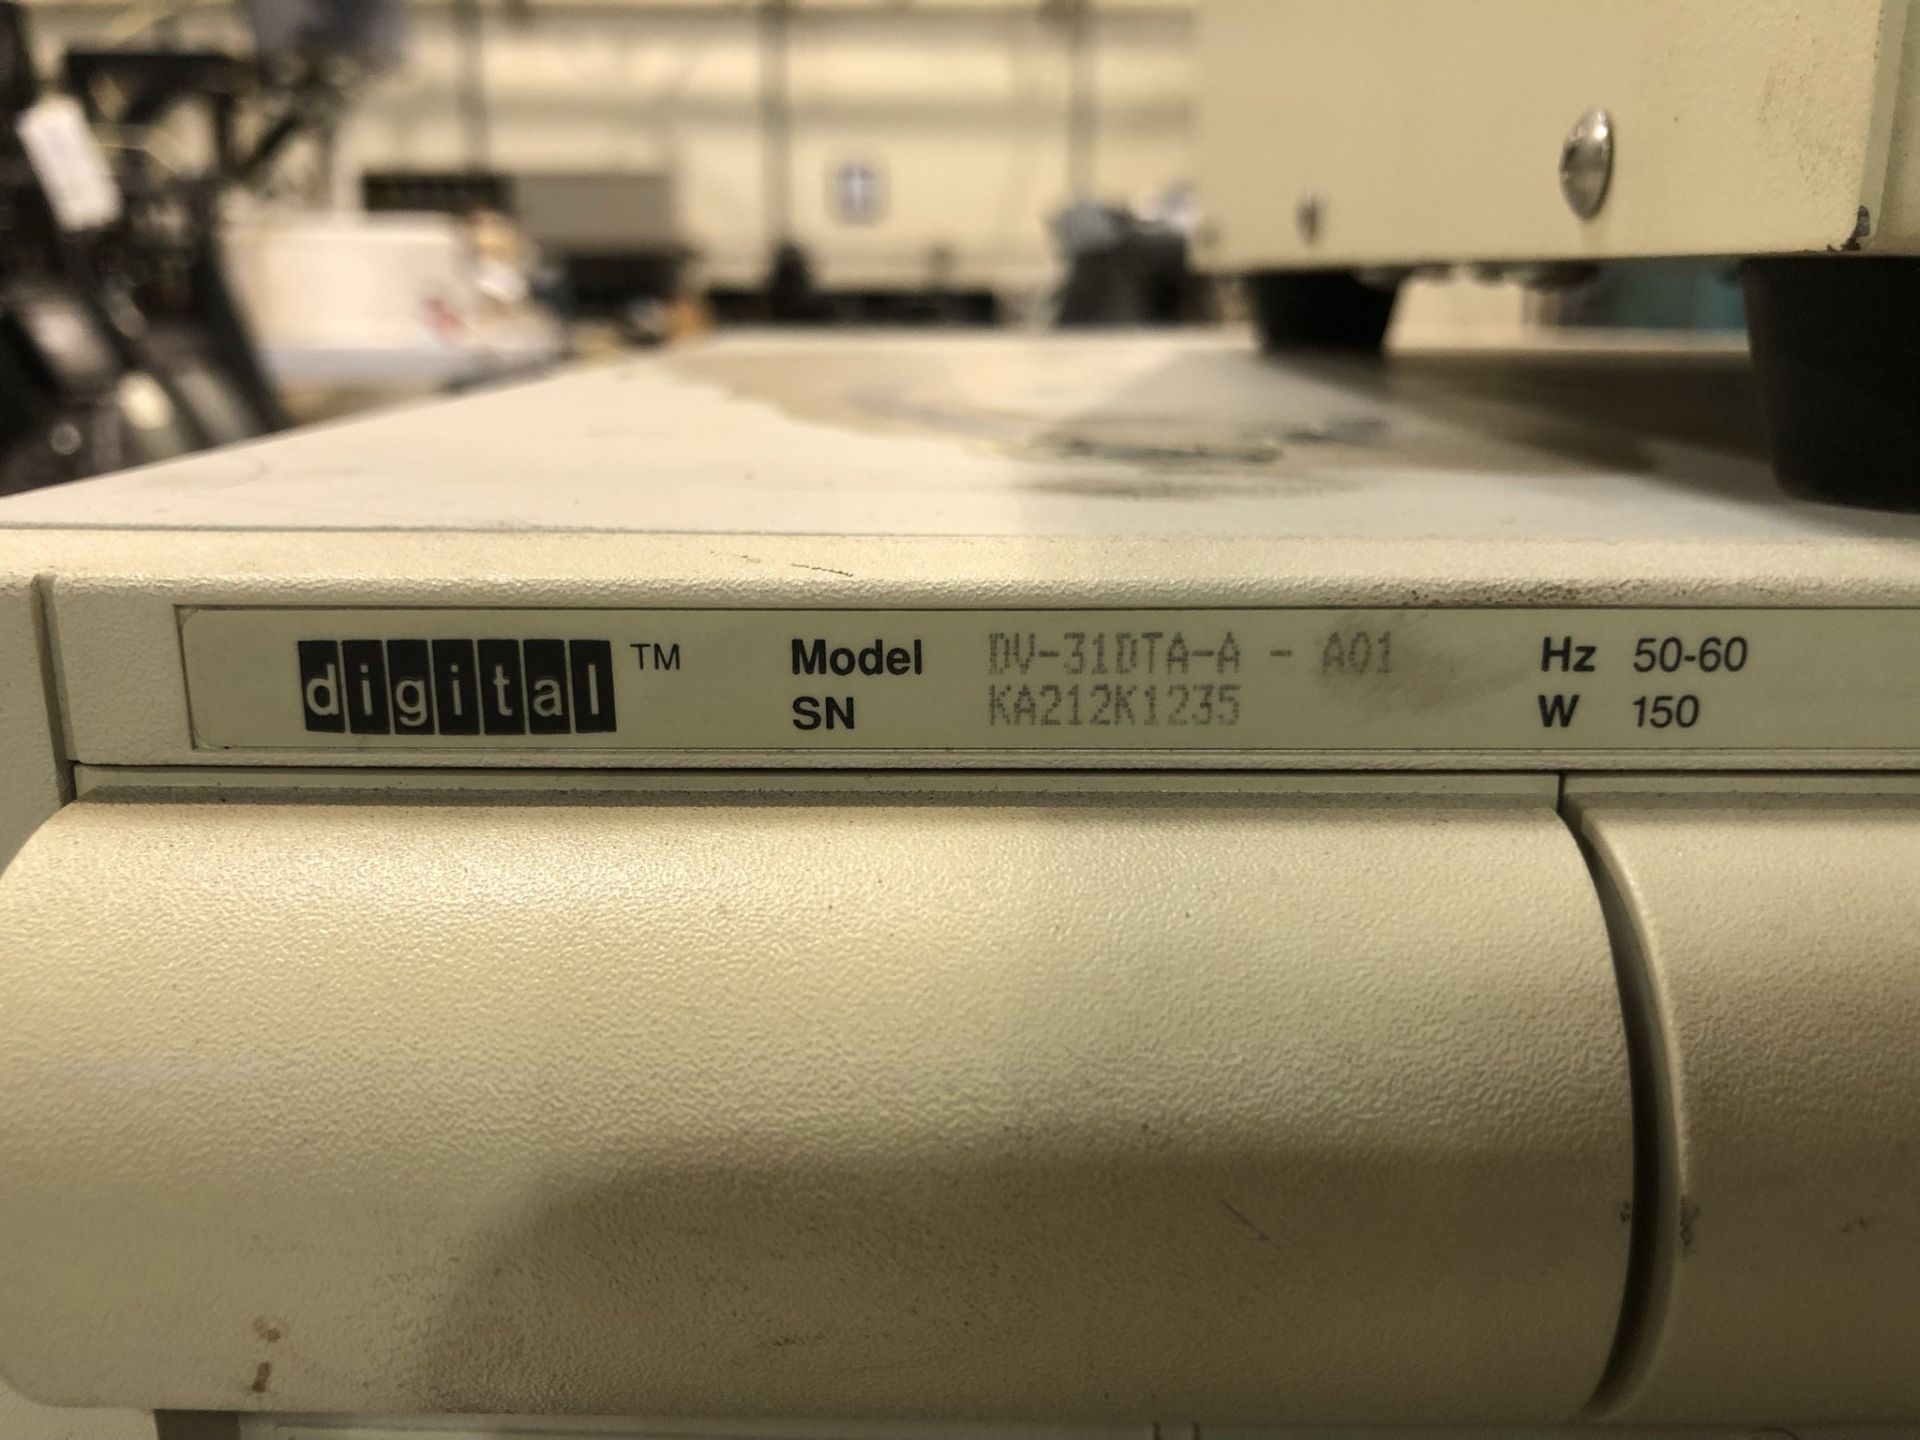 Leeds and Northrup 1300 process programmer, Dunnigan Corp Model 4501A Accelerometer, Commonwealth - Image 10 of 11